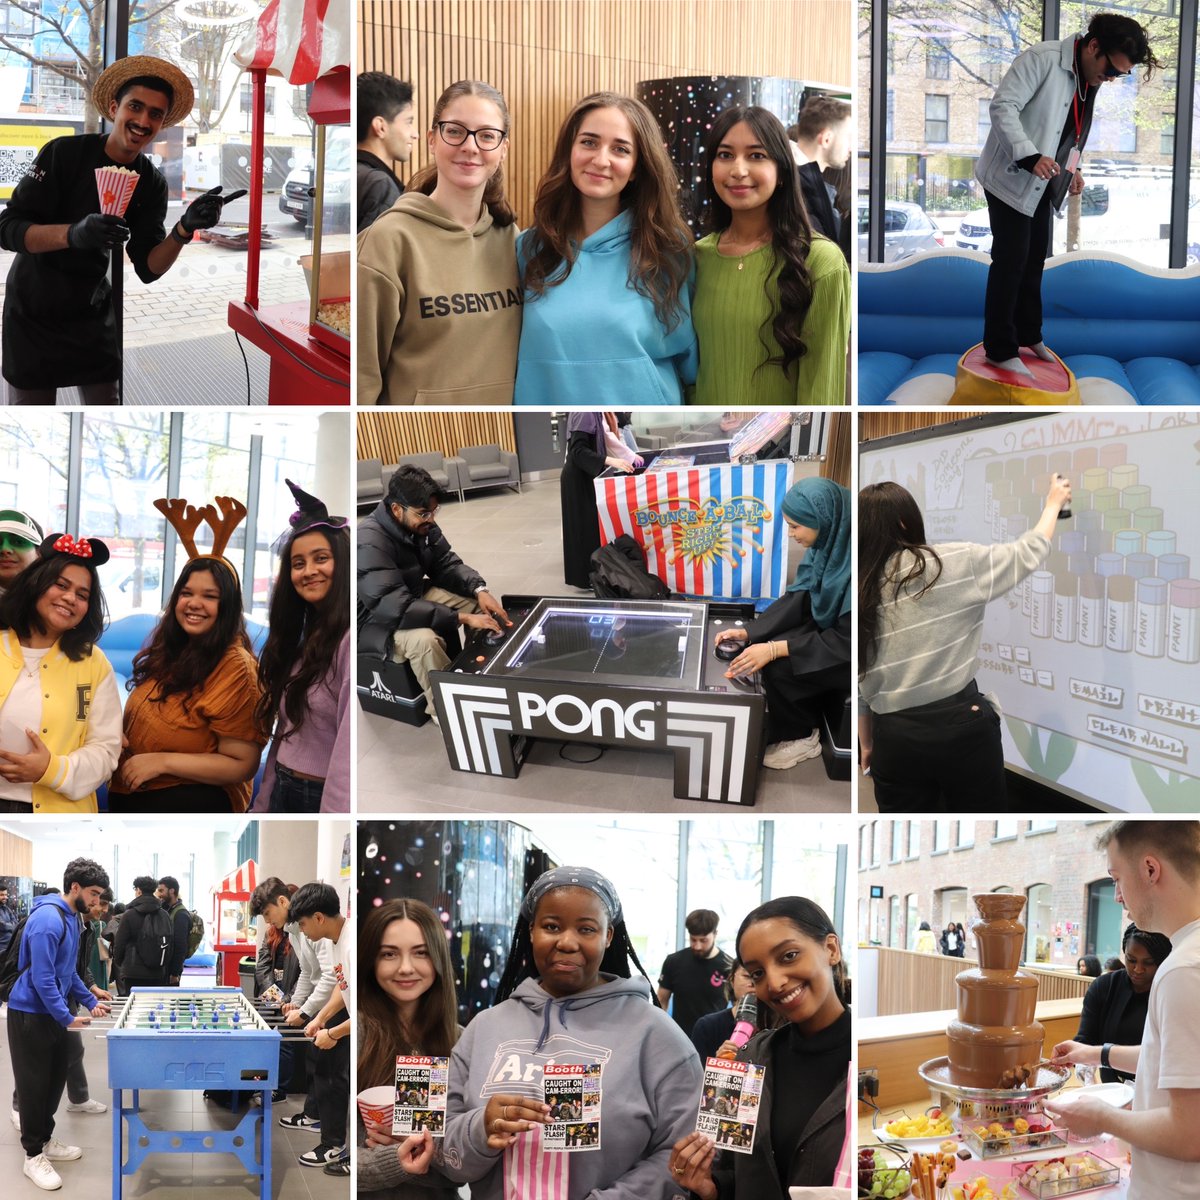 Throwback to our Spring Thing event last month! From the digital graffiti wall, chocolate fountain, table tennis, and photo booth - it was a wonderful afternoon of catching up with friends and colleagues across The City Law School 🌷